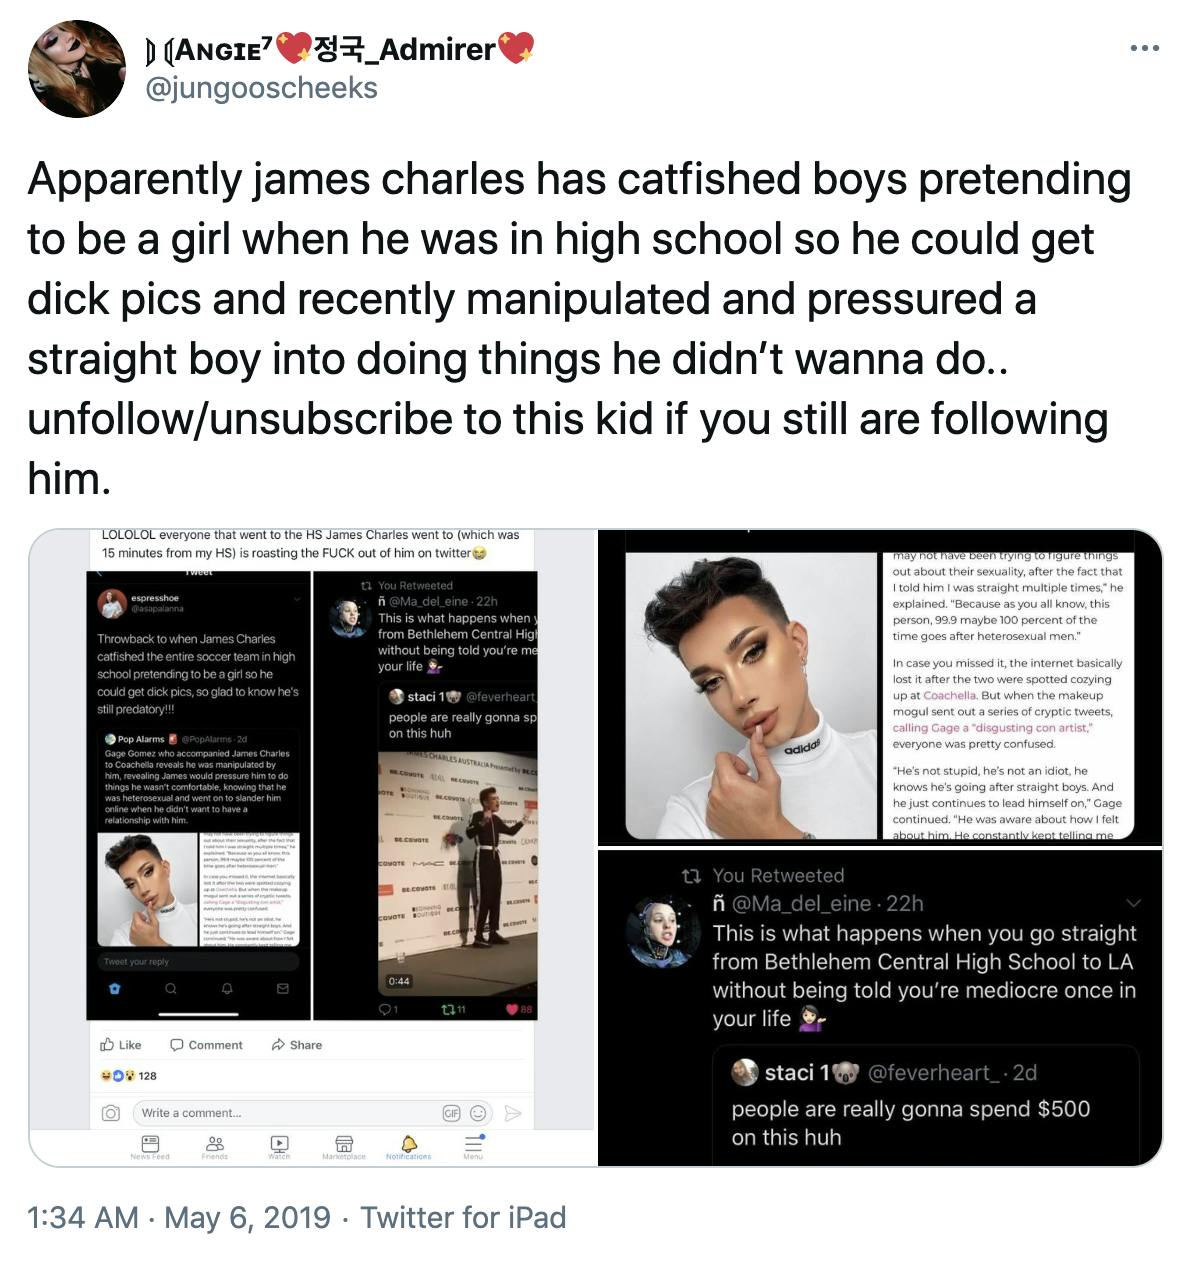 'Apparently james charles has catfished boys pretending to be a girl when he was in high school so he could get dick pics and recently manipulated and pressured a straight boy into doing things he didn’t wanna do.. unfollow/unsubscribe to this kid if you still are following him.' screenshots of tweets. One says 'LOLOLOL everyone that went to the high school James Charles went to (which was 15 mins from my high school) is roasting the fuck out of him on Twitter' The tweets embedded within that tweet say 'Throwback to when James Charles catfishes the entire soccer team in high school pretending to be a girl so he could get dick pics, so glad to know he's still predatory!!!' embedded within that is a tweet by Pop Alarms saying 'Gage Gomez who accompanied James Charles to Coachella reveals he was manipulated by him, revealing James would pressure him to do things he wasn't comfortable, knowing that he was heterosexual and went on to slander him online when he didn't want to have a relationship with him' besides a picture of Charles in full makeup